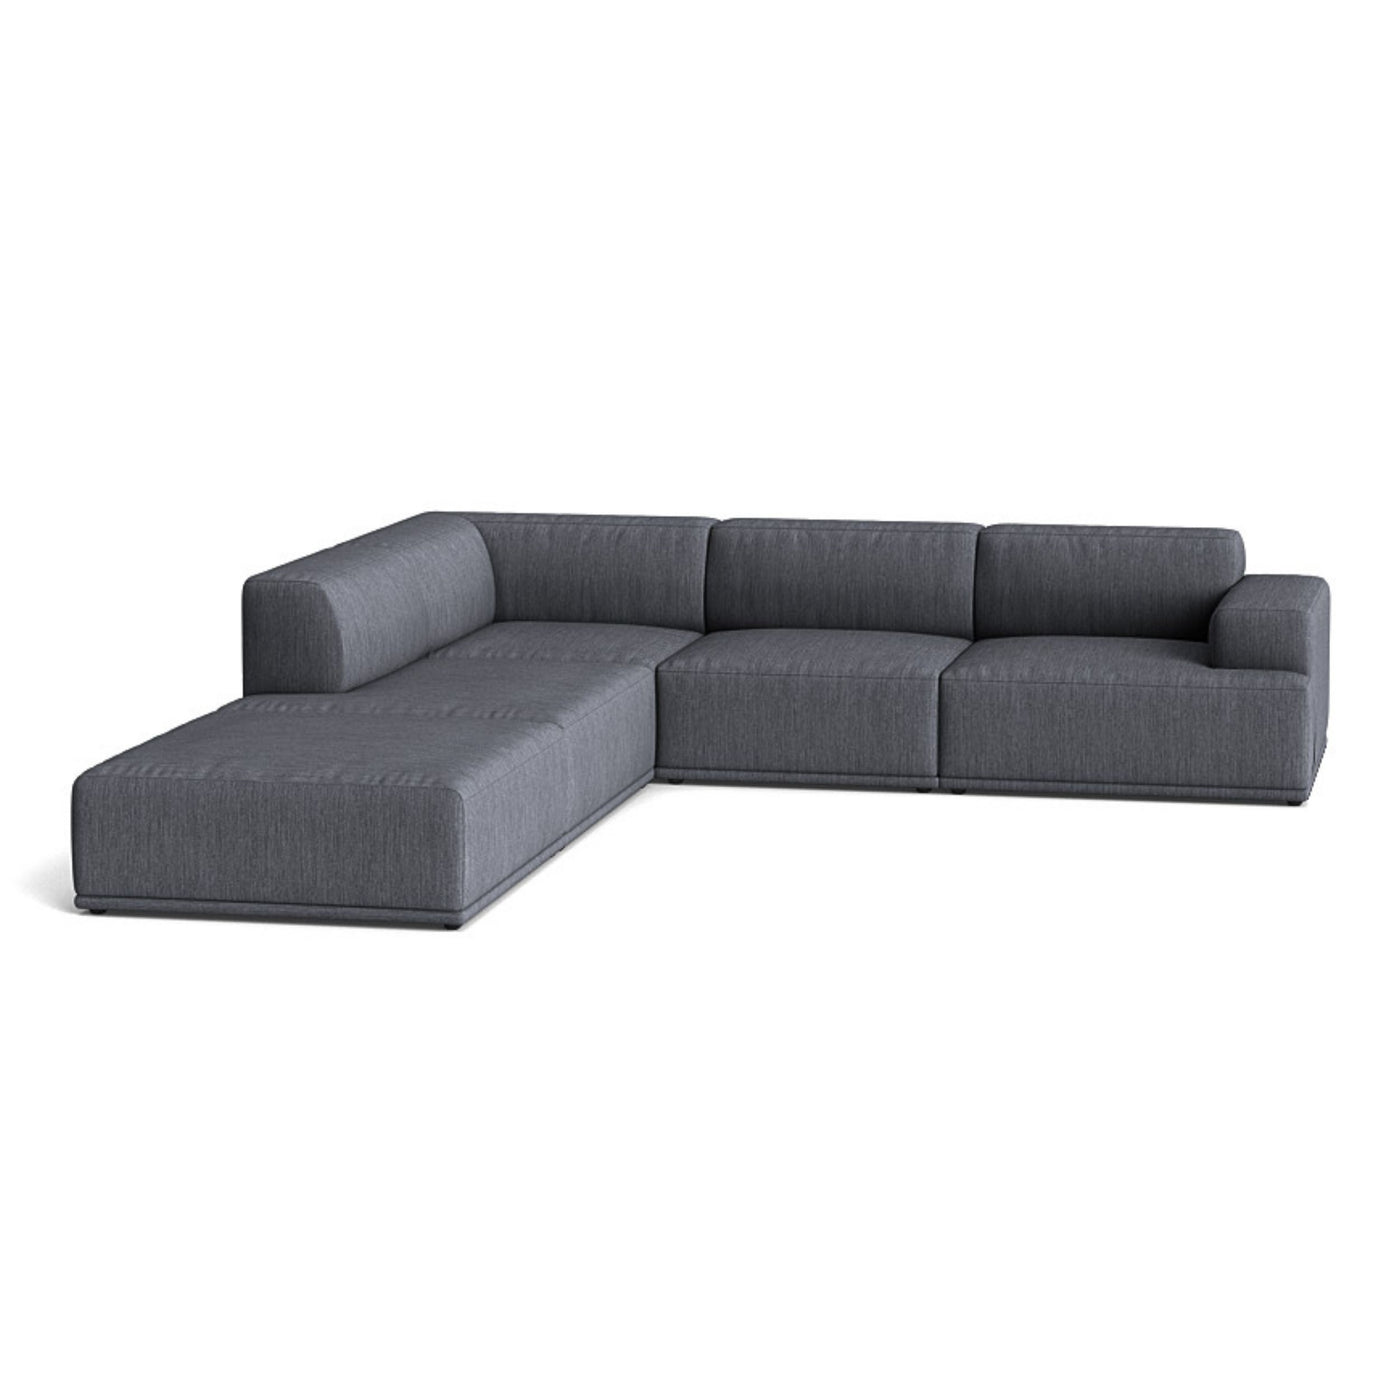 Muuto Connect Soft Modular Corner Sofa, configuration 1. Made-to-order from someday designs. #colour_balder-152